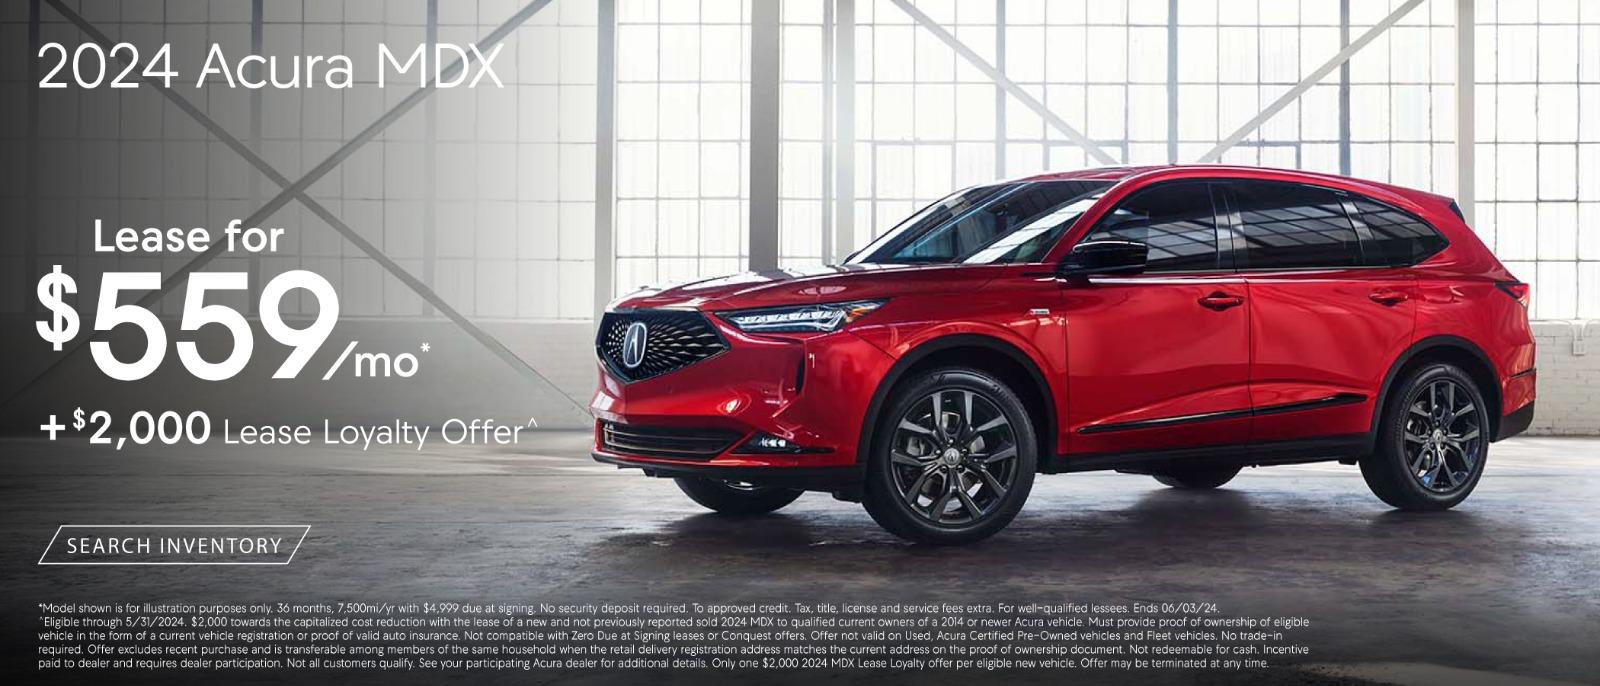 2024 Acura MDX Lease for $559 per month